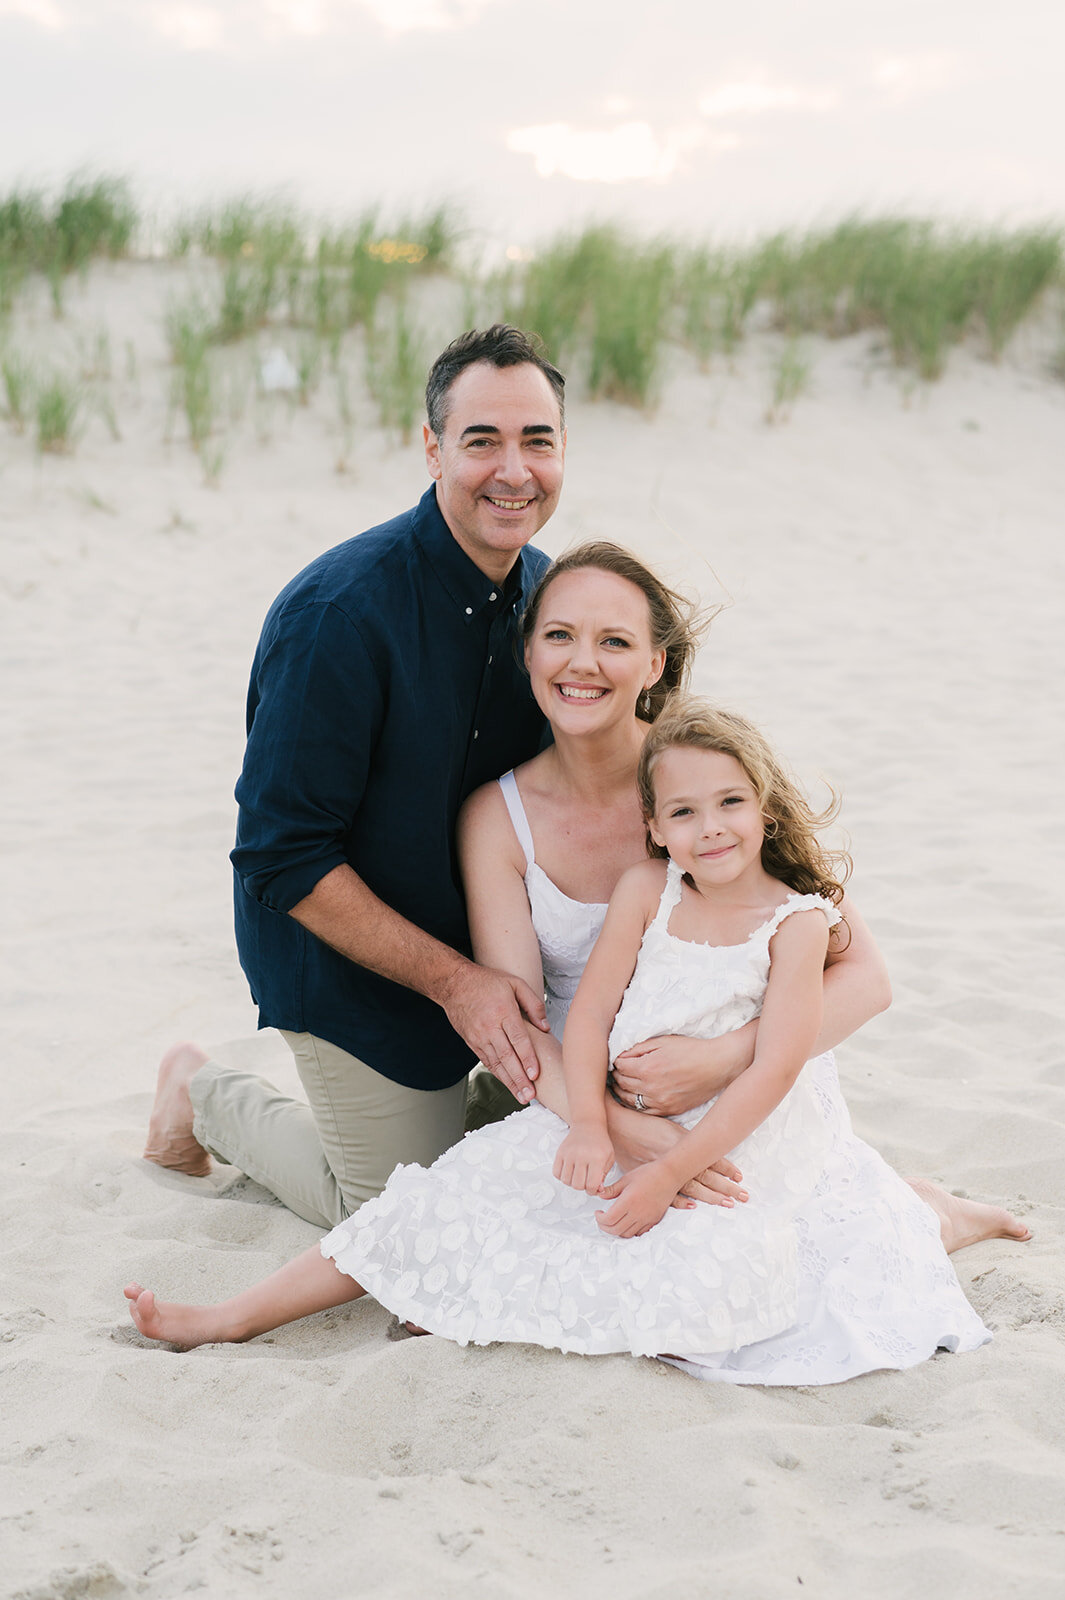 Mom, dad, and daughter posing on beach during family photos  | NKB Photo